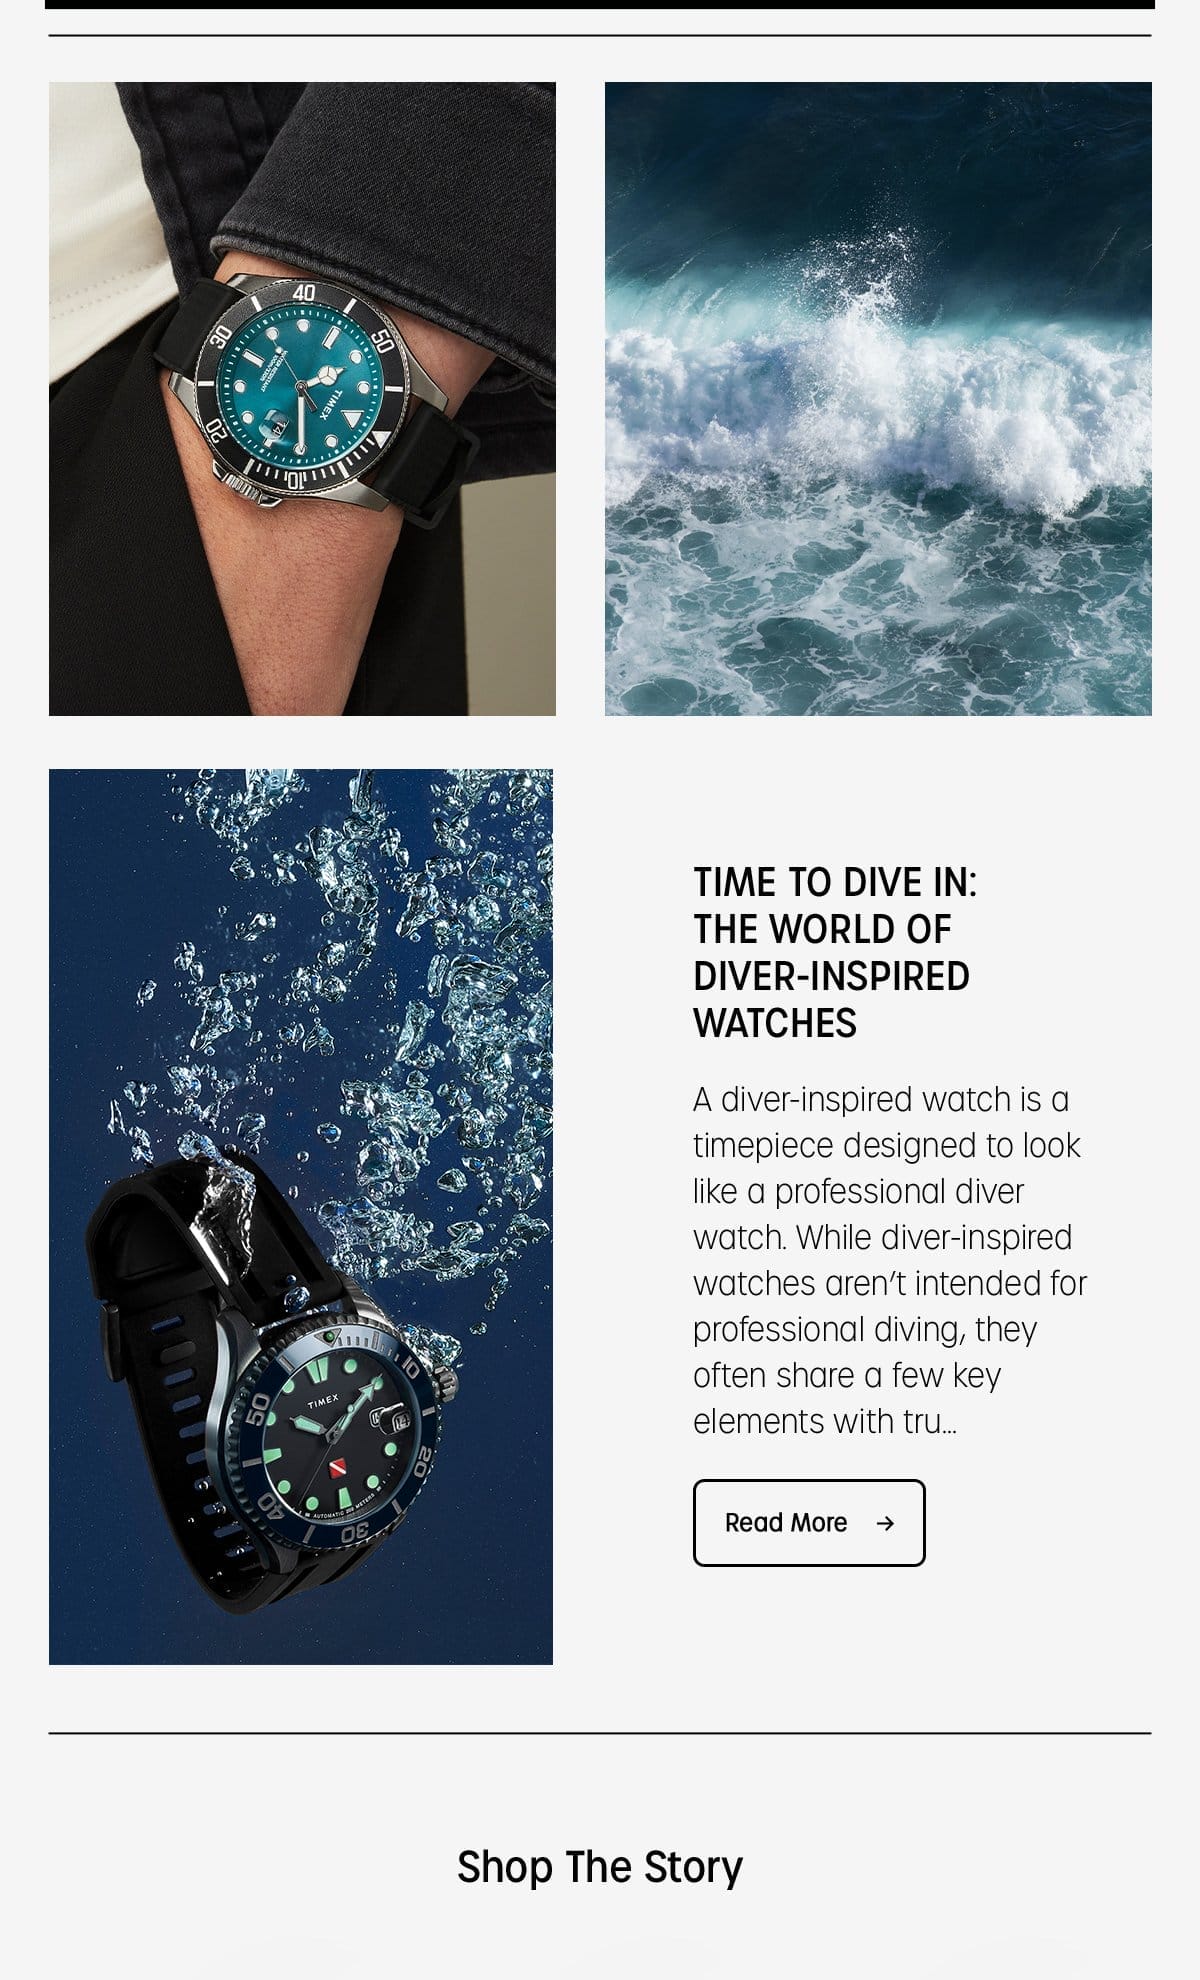 TIME TO DIVE IN: THEWORLD OF DIVER-INSPIRED WATCHES | A diver-inspired watch is a timepiece designed to look like a professional diver watch. While diver-inspired watches aren't intended for professional diving, they often share a few key elements with tru... | Read More